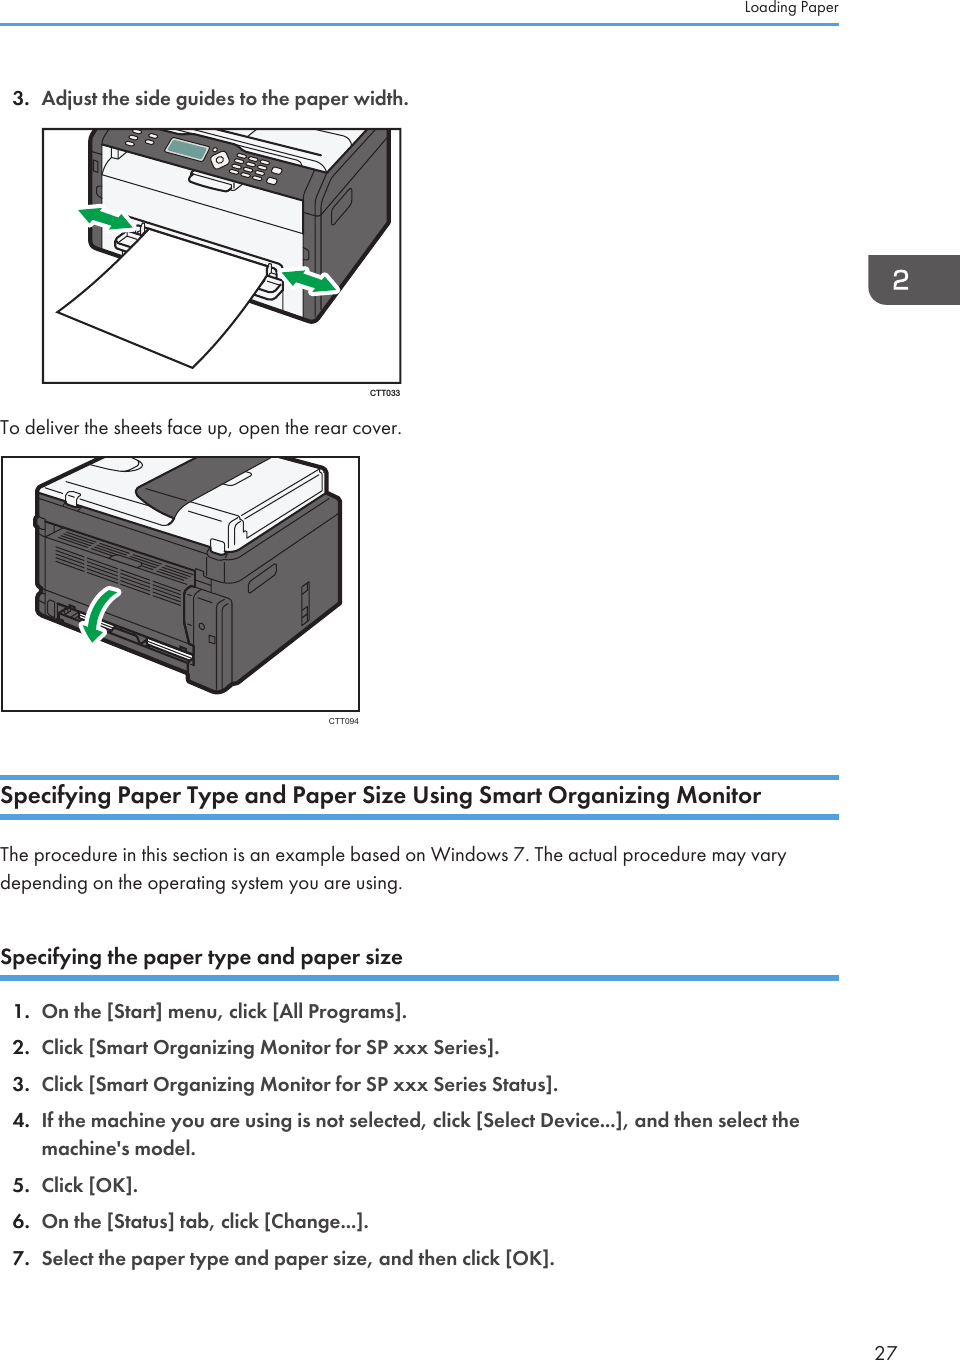 3. Adjust the side guides to the paper width.CTT033To deliver the sheets face up, open the rear cover.CTT094Specifying Paper Type and Paper Size Using Smart Organizing MonitorThe procedure in this section is an example based on Windows 7. The actual procedure may varydepending on the operating system you are using.Specifying the paper type and paper size1. On the [Start] menu, click [All Programs].2. Click [Smart Organizing Monitor for SP xxx Series].3. Click [Smart Organizing Monitor for SP xxx Series Status].4. If the machine you are using is not selected, click [Select Device...], and then select themachine&apos;s model.5. Click [OK].6. On the [Status] tab, click [Change...].7. Select the paper type and paper size, and then click [OK].Loading Paper27